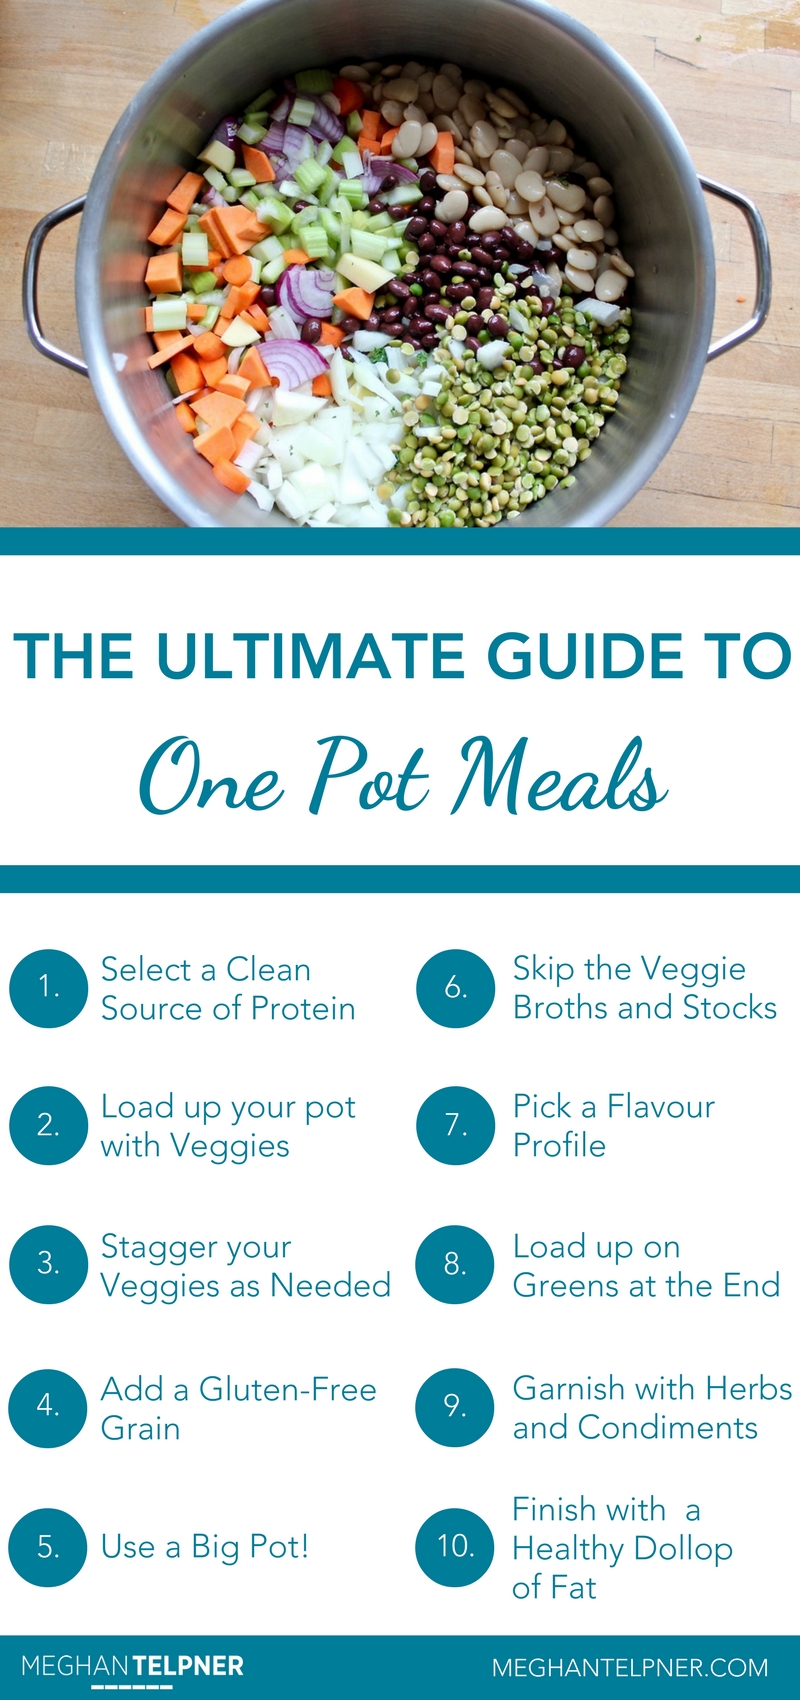 The Ultimate Guide To One Pot Meals